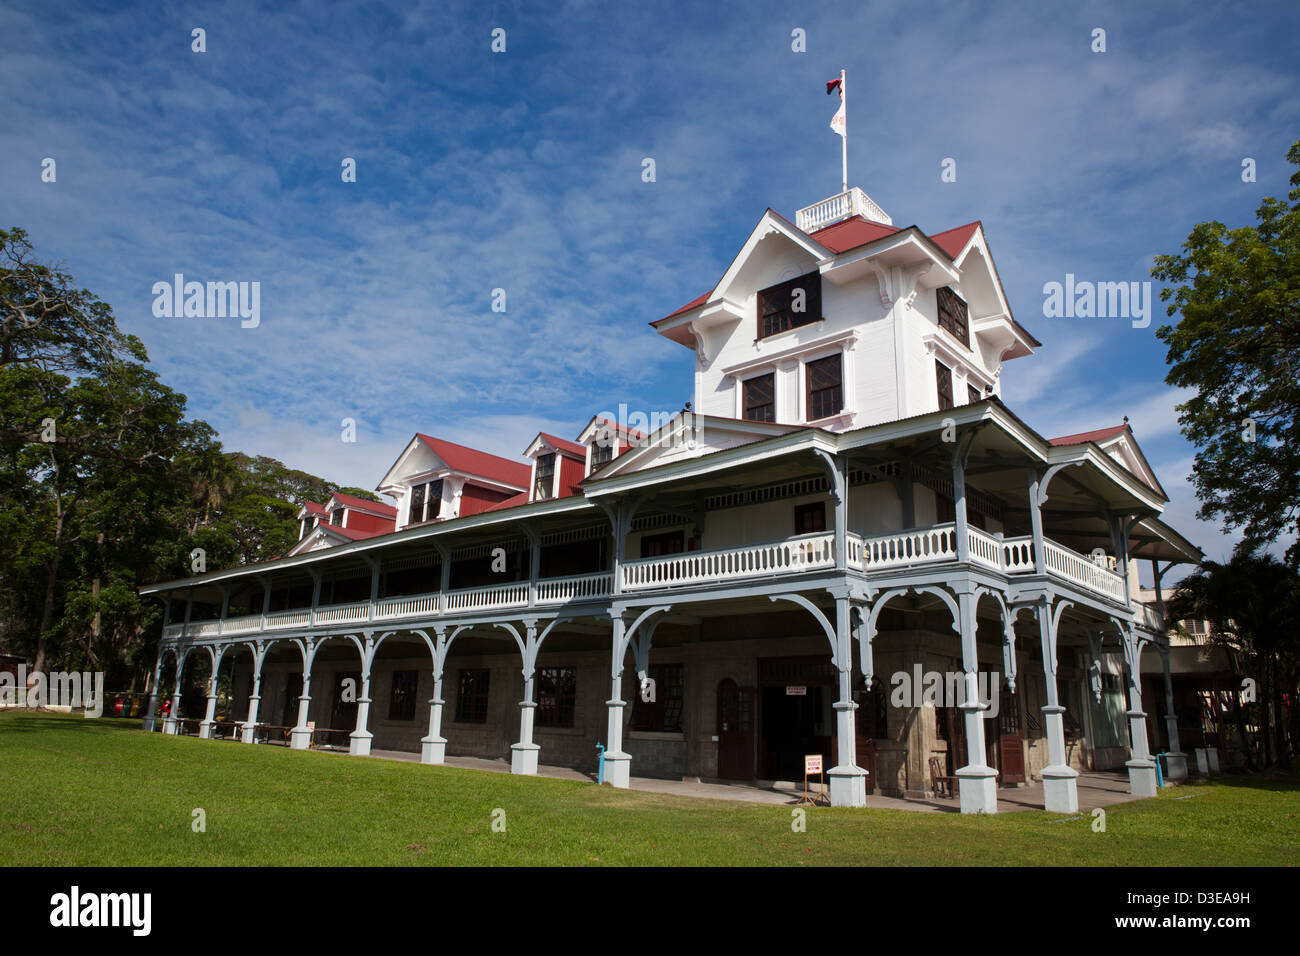 Silliman University is a private research university in Dumaguete, Philippines. Established in 1901 as Silliman Institute by the Stock Photo